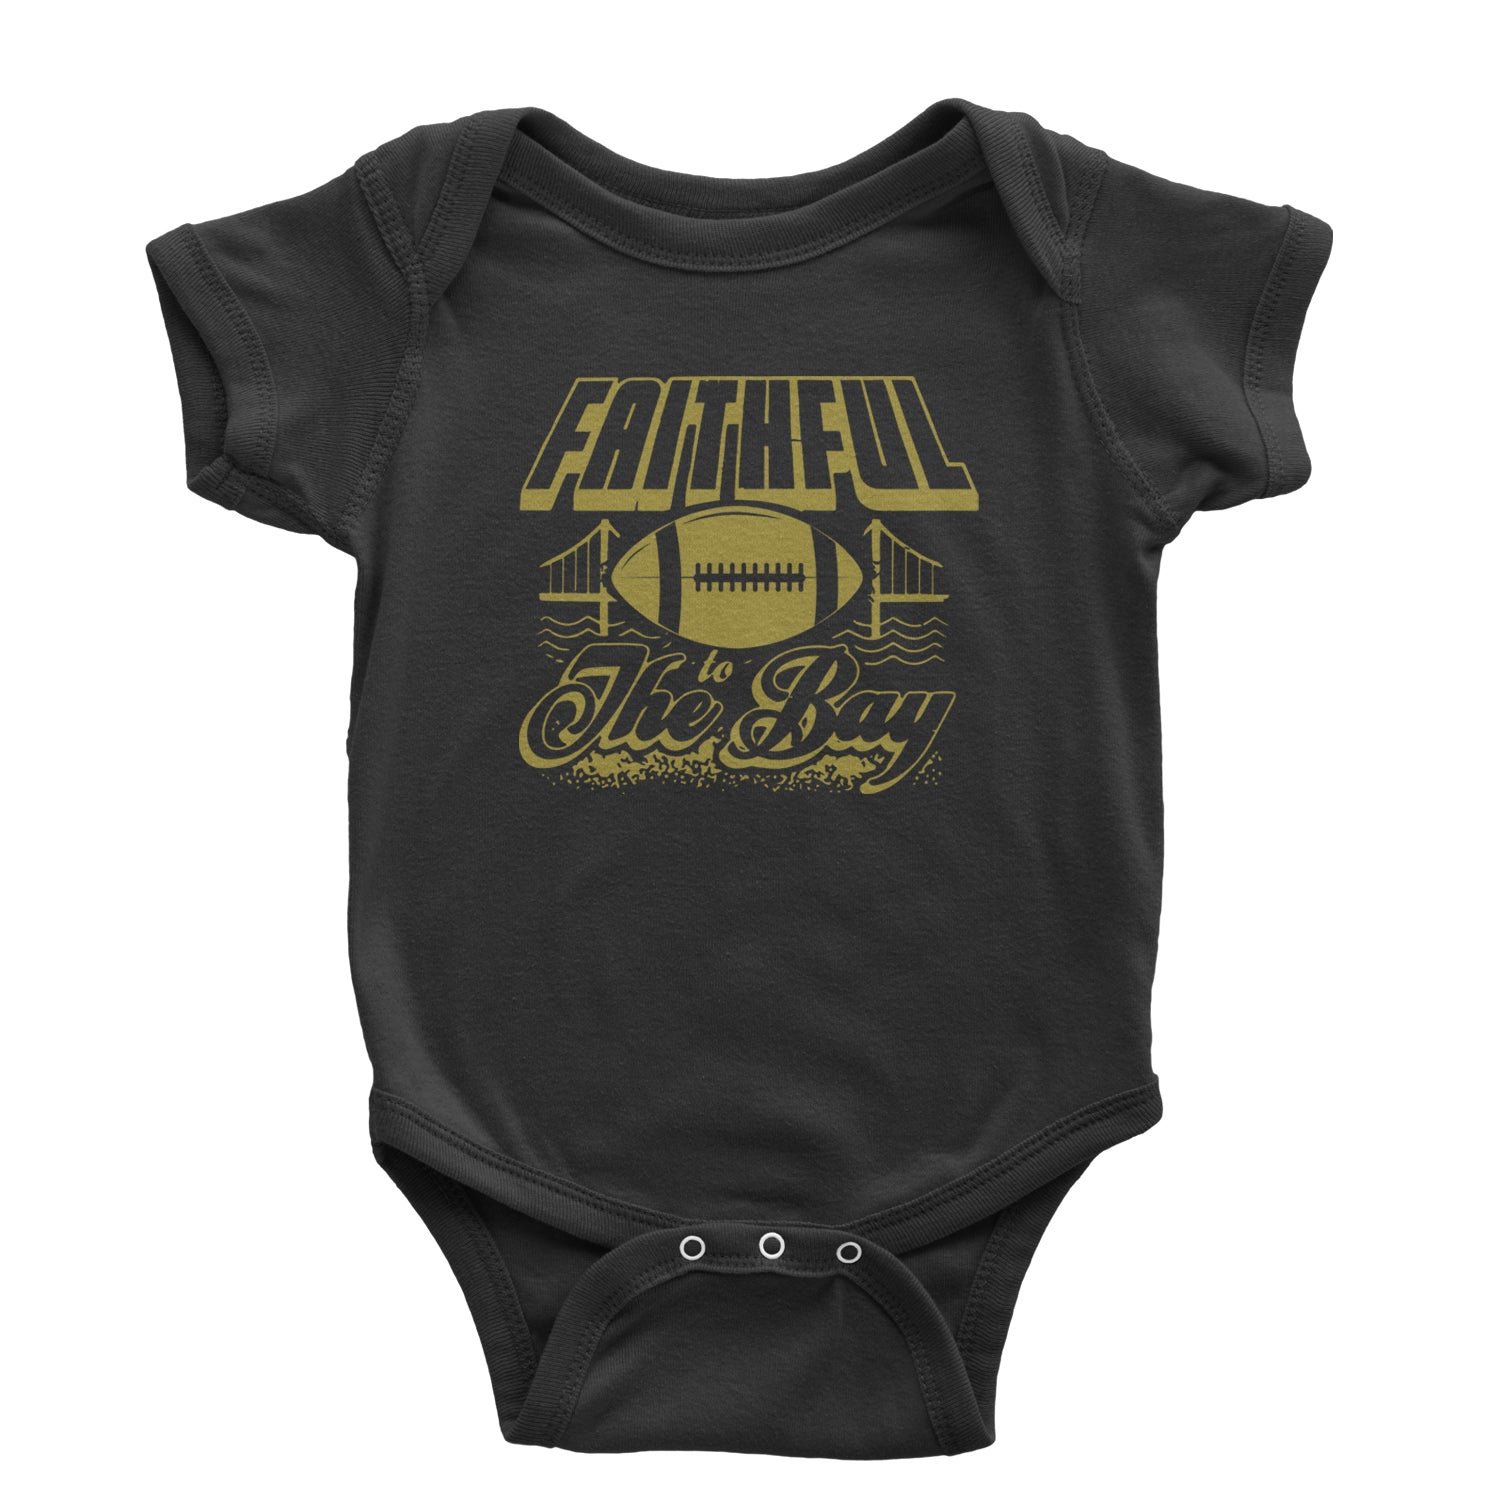 Faithful To The San Francisco Bay Infant One-Piece Romper Bodysuit and Toddler T-shirt